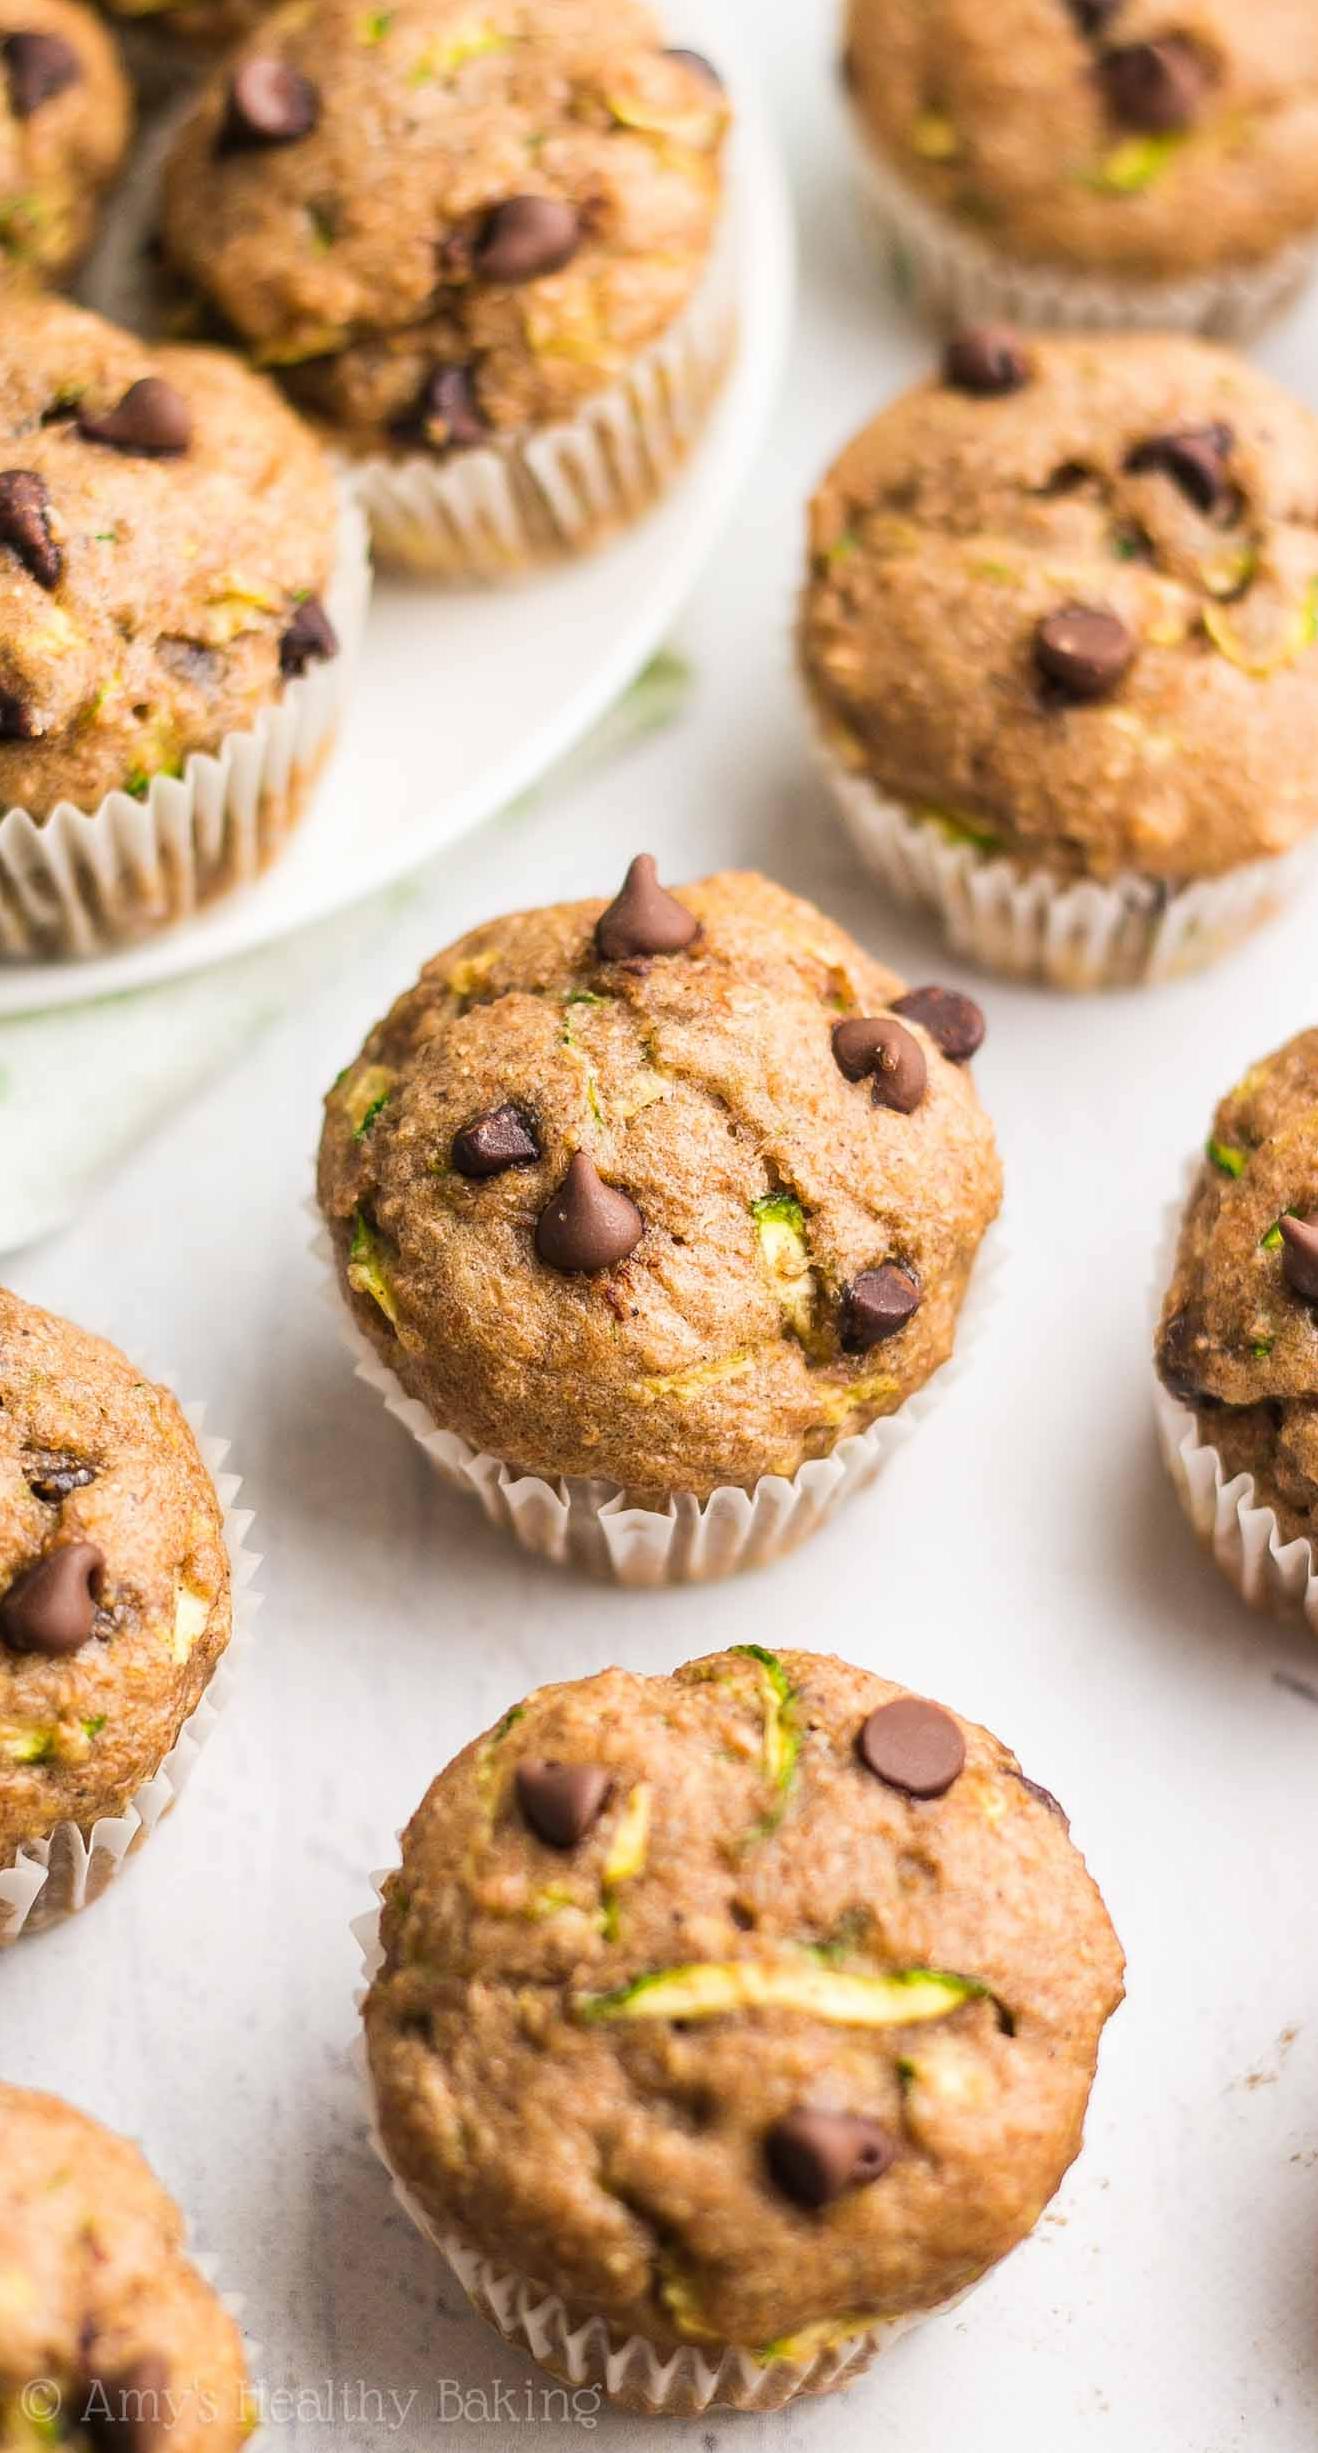  Perfect for grabbing on-the-go or as an afternoon treat, these mini-muffins will satisfy your sweet tooth without the guilt.